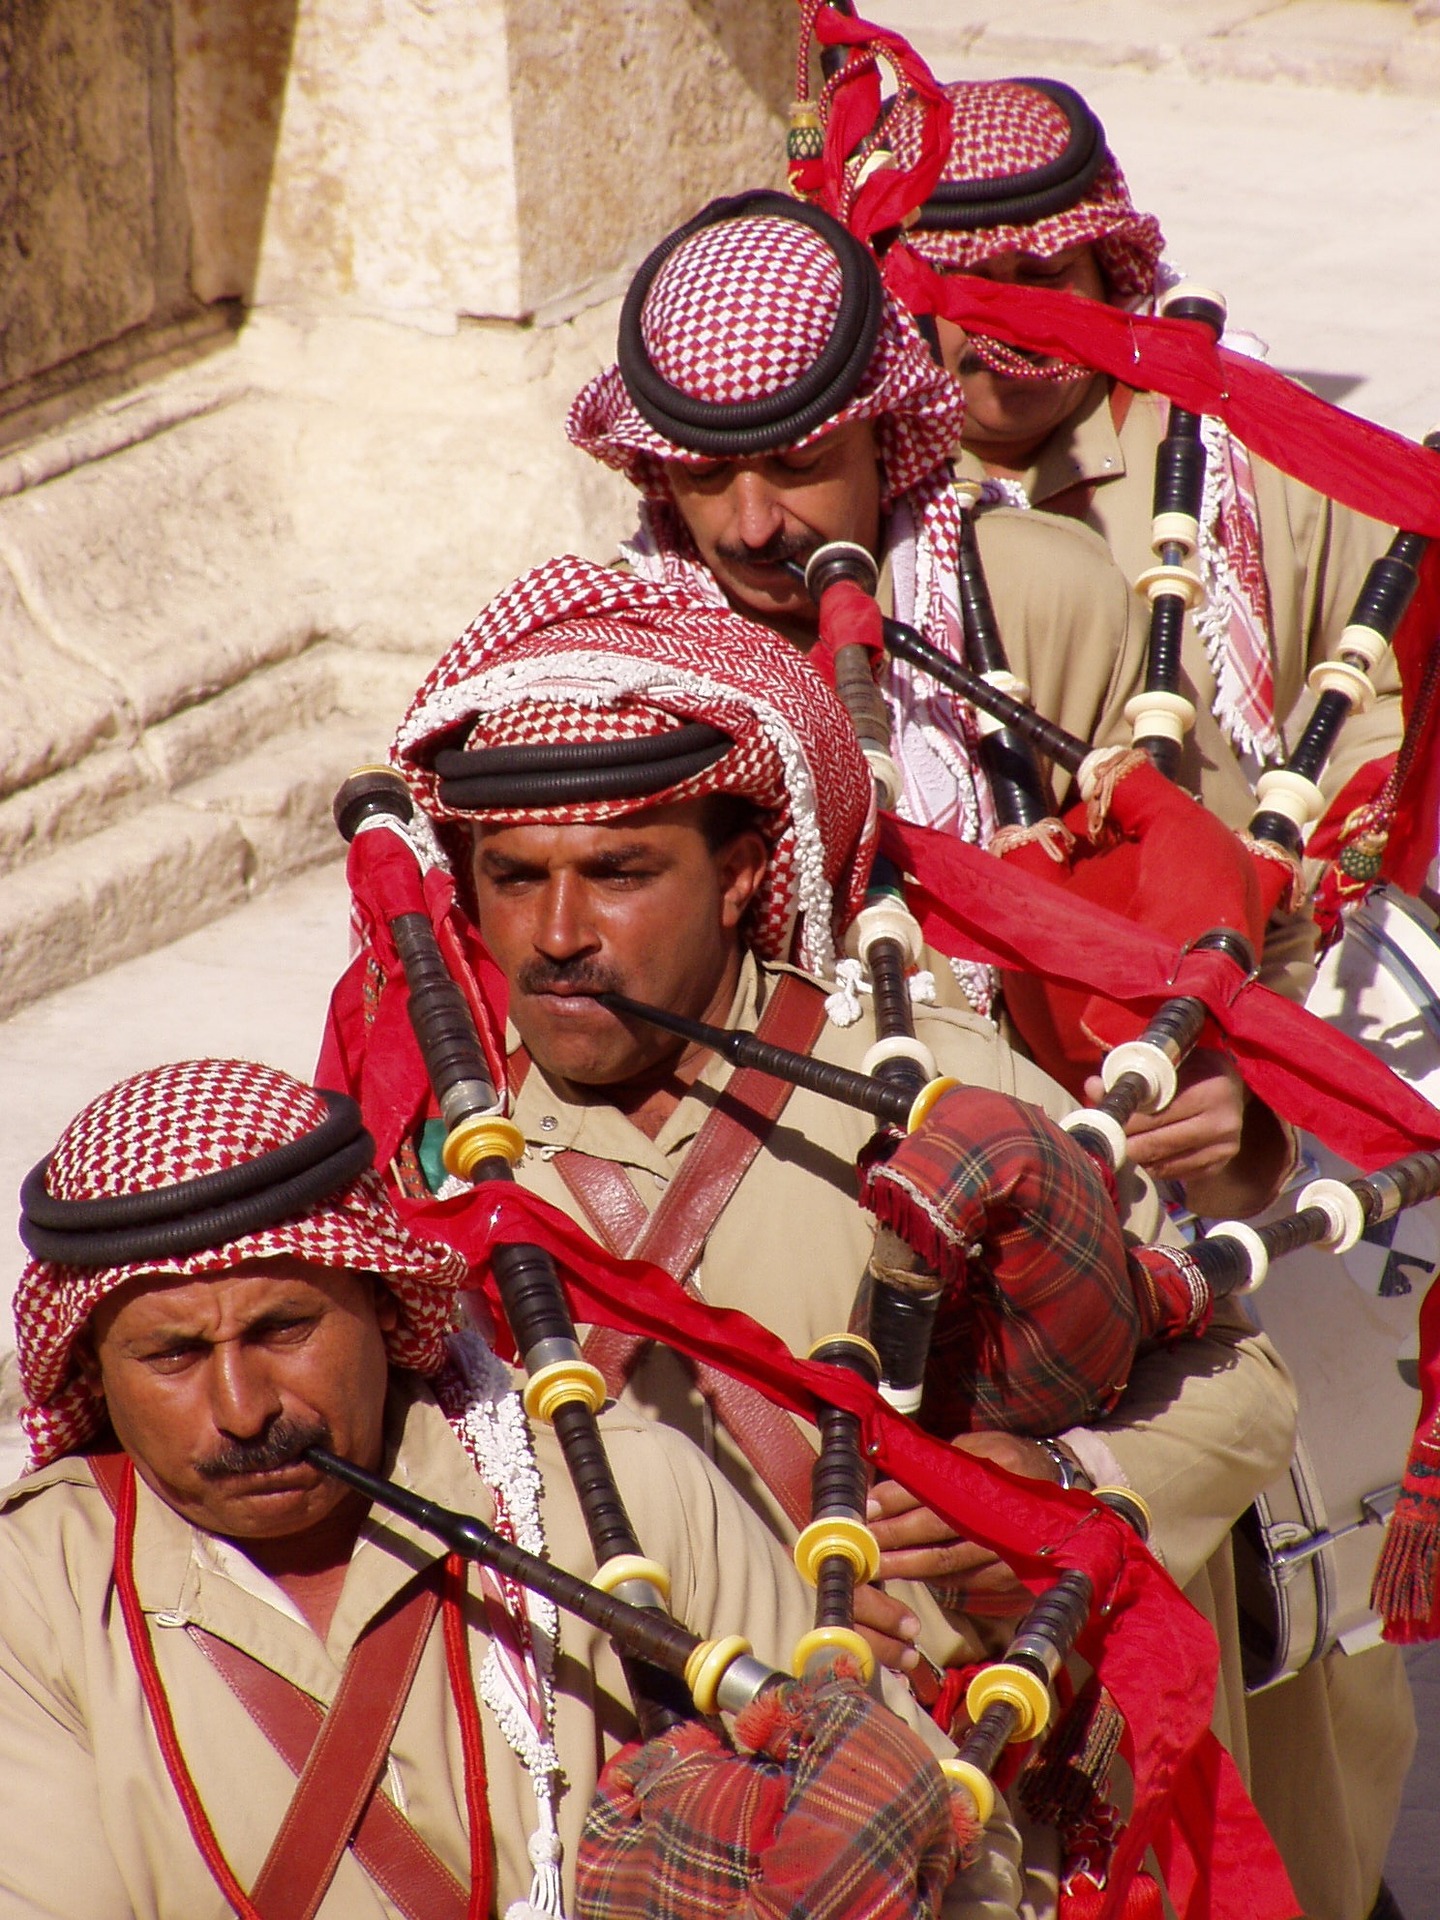 A line of men playing the bagpipes